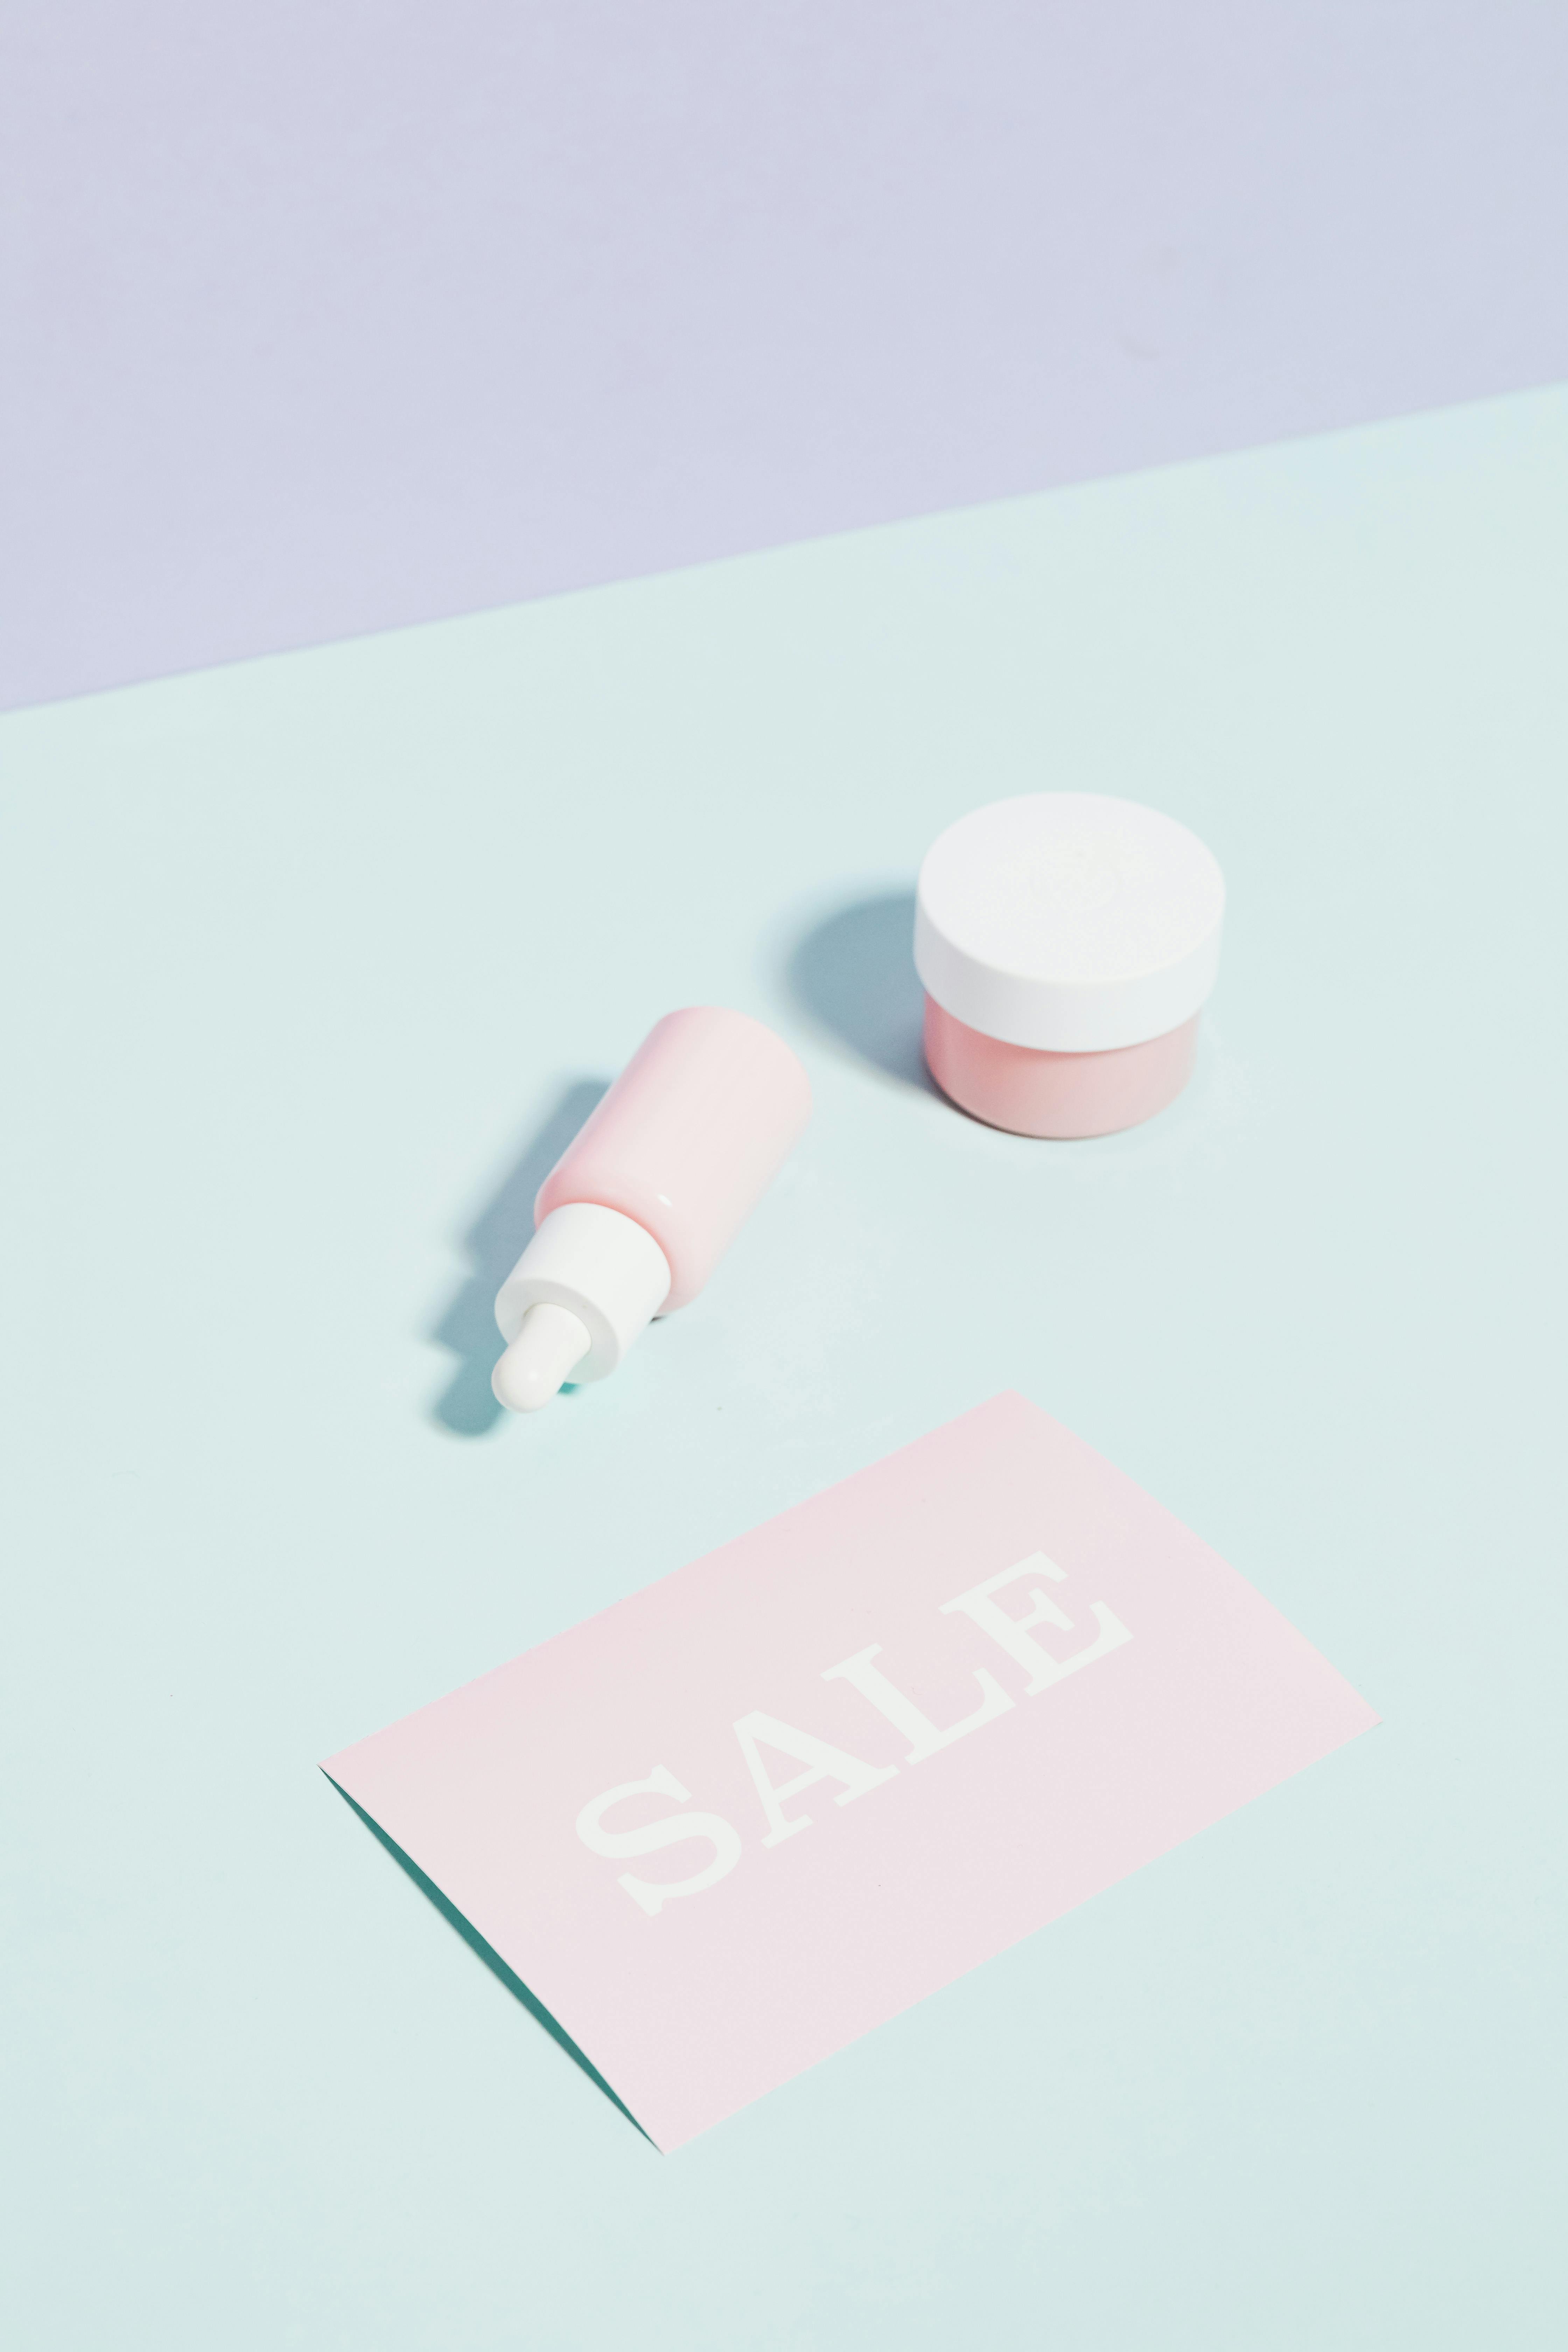 medicinal products on sale